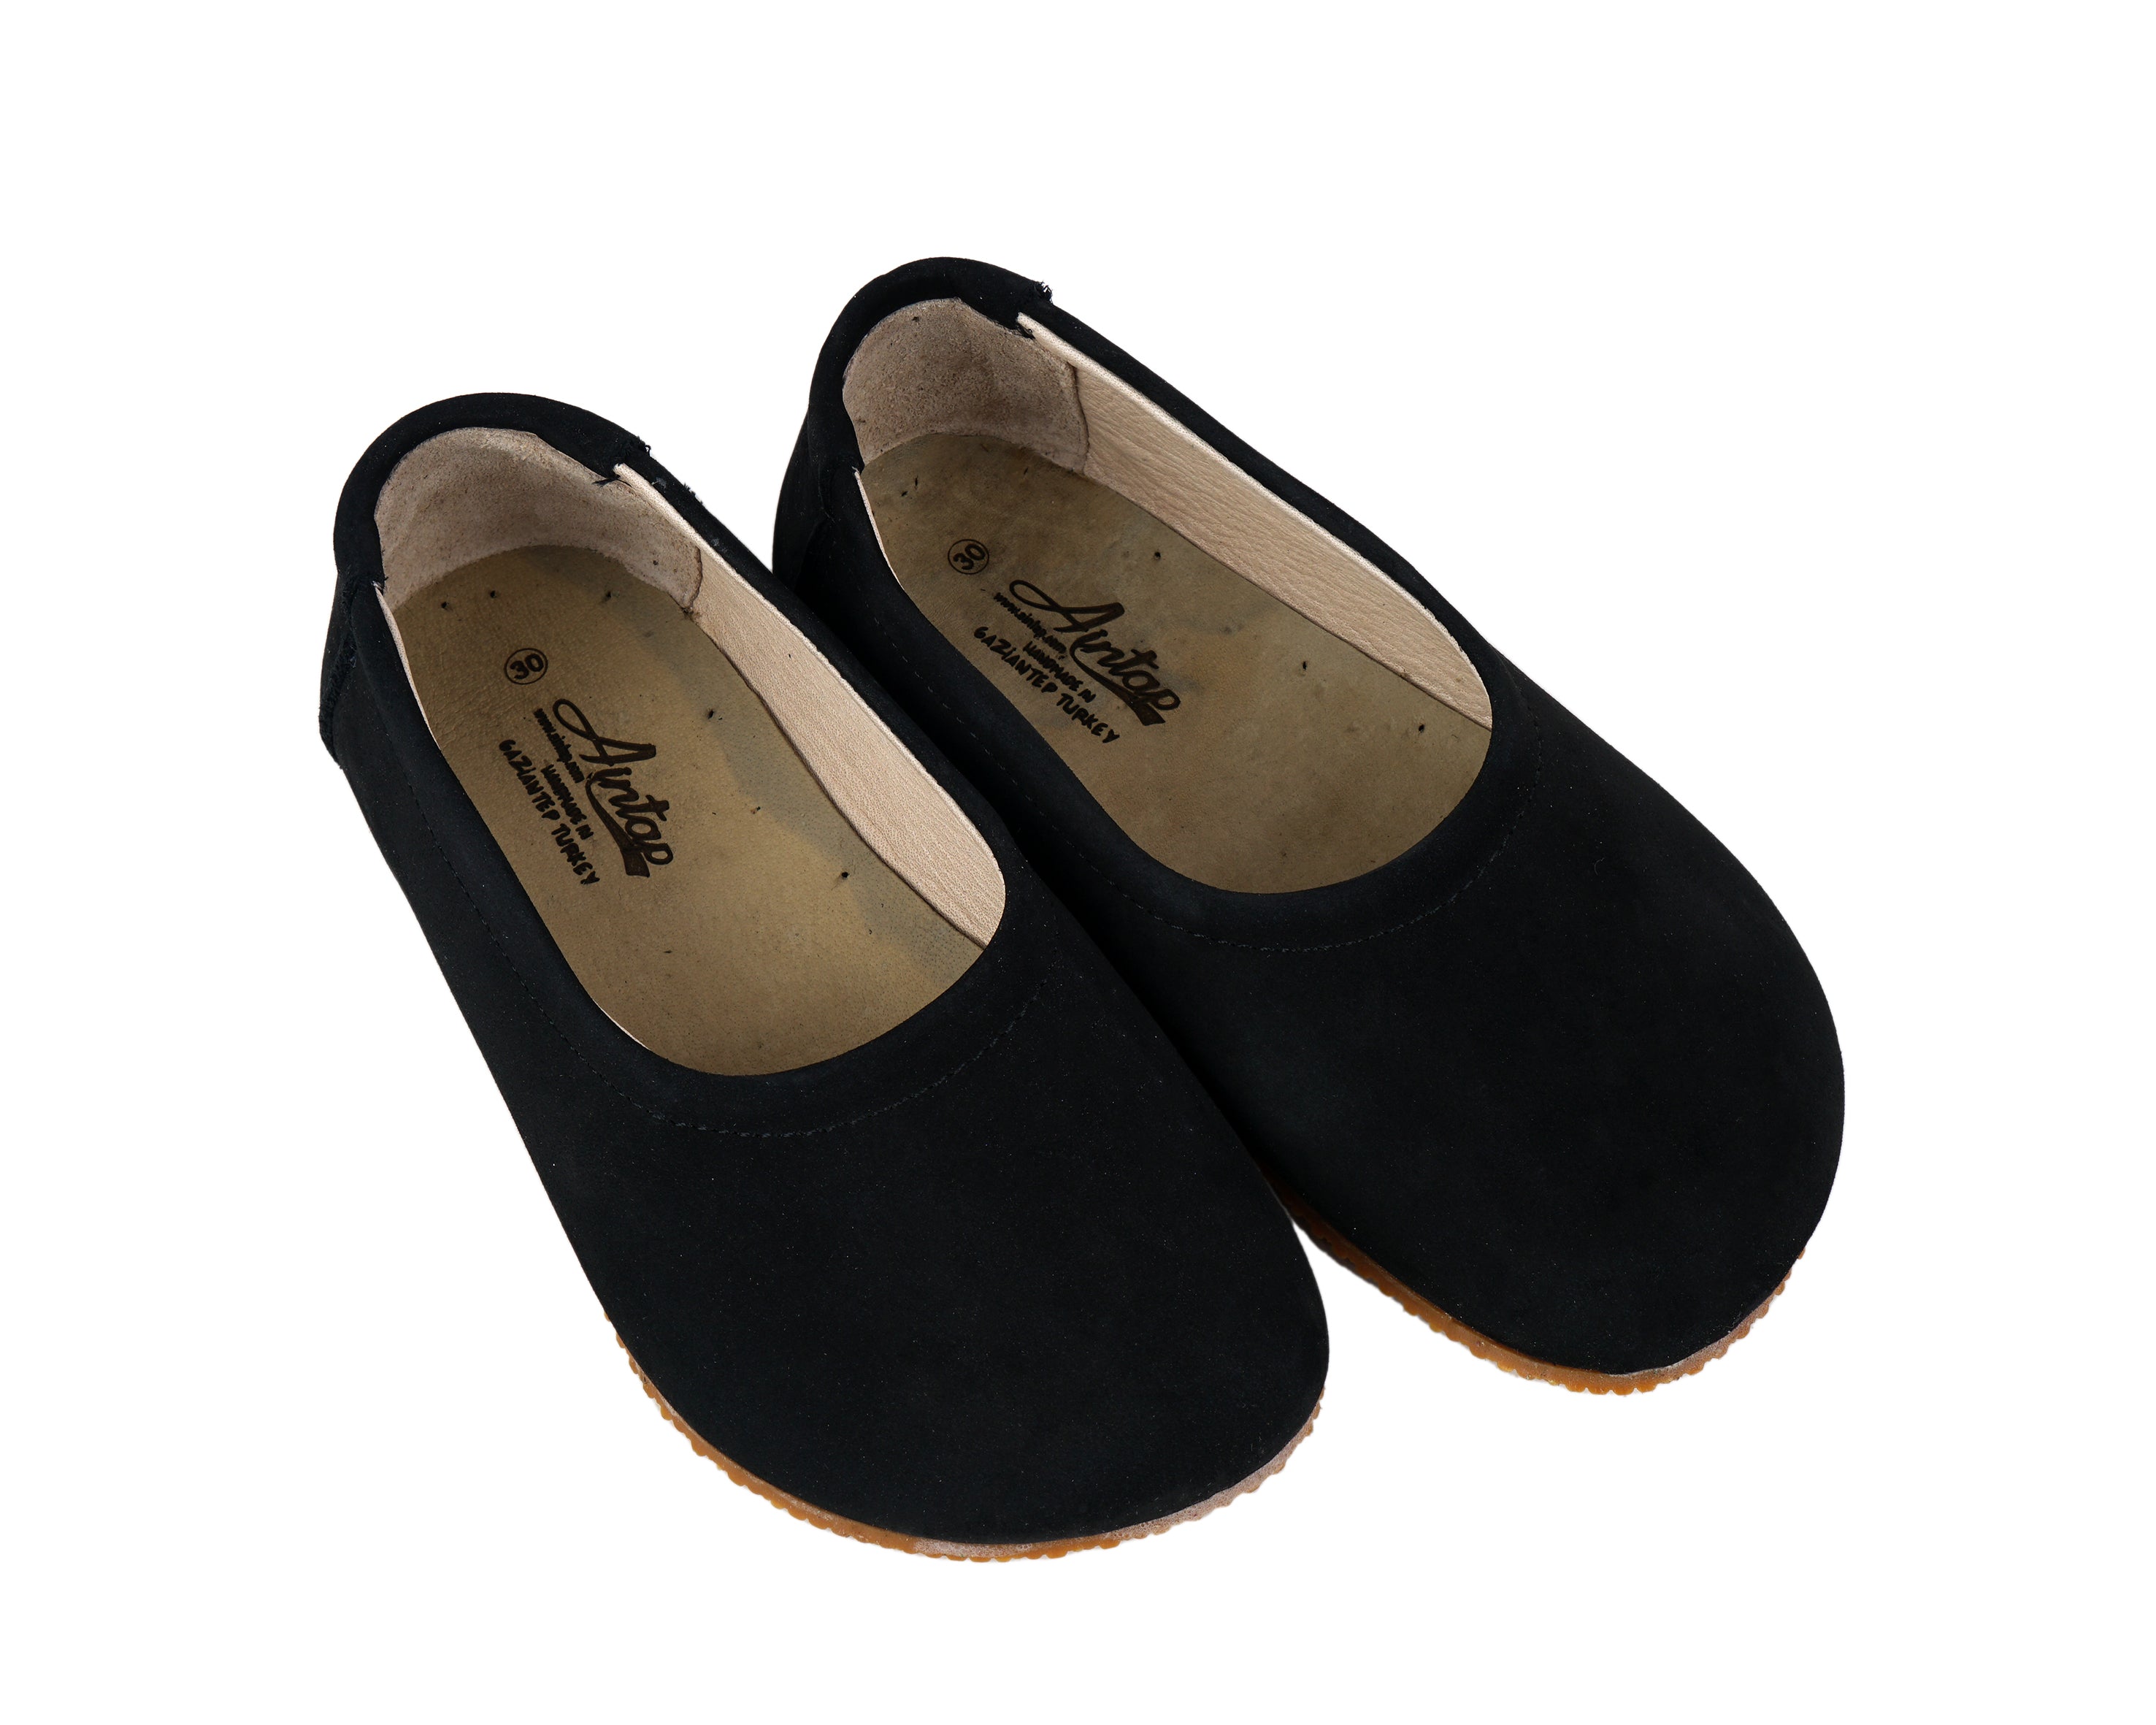 Black Kids Flat Ballet Wide Barefoot Shoes Nubuck Leather Handmade Leather & Rubber Sole